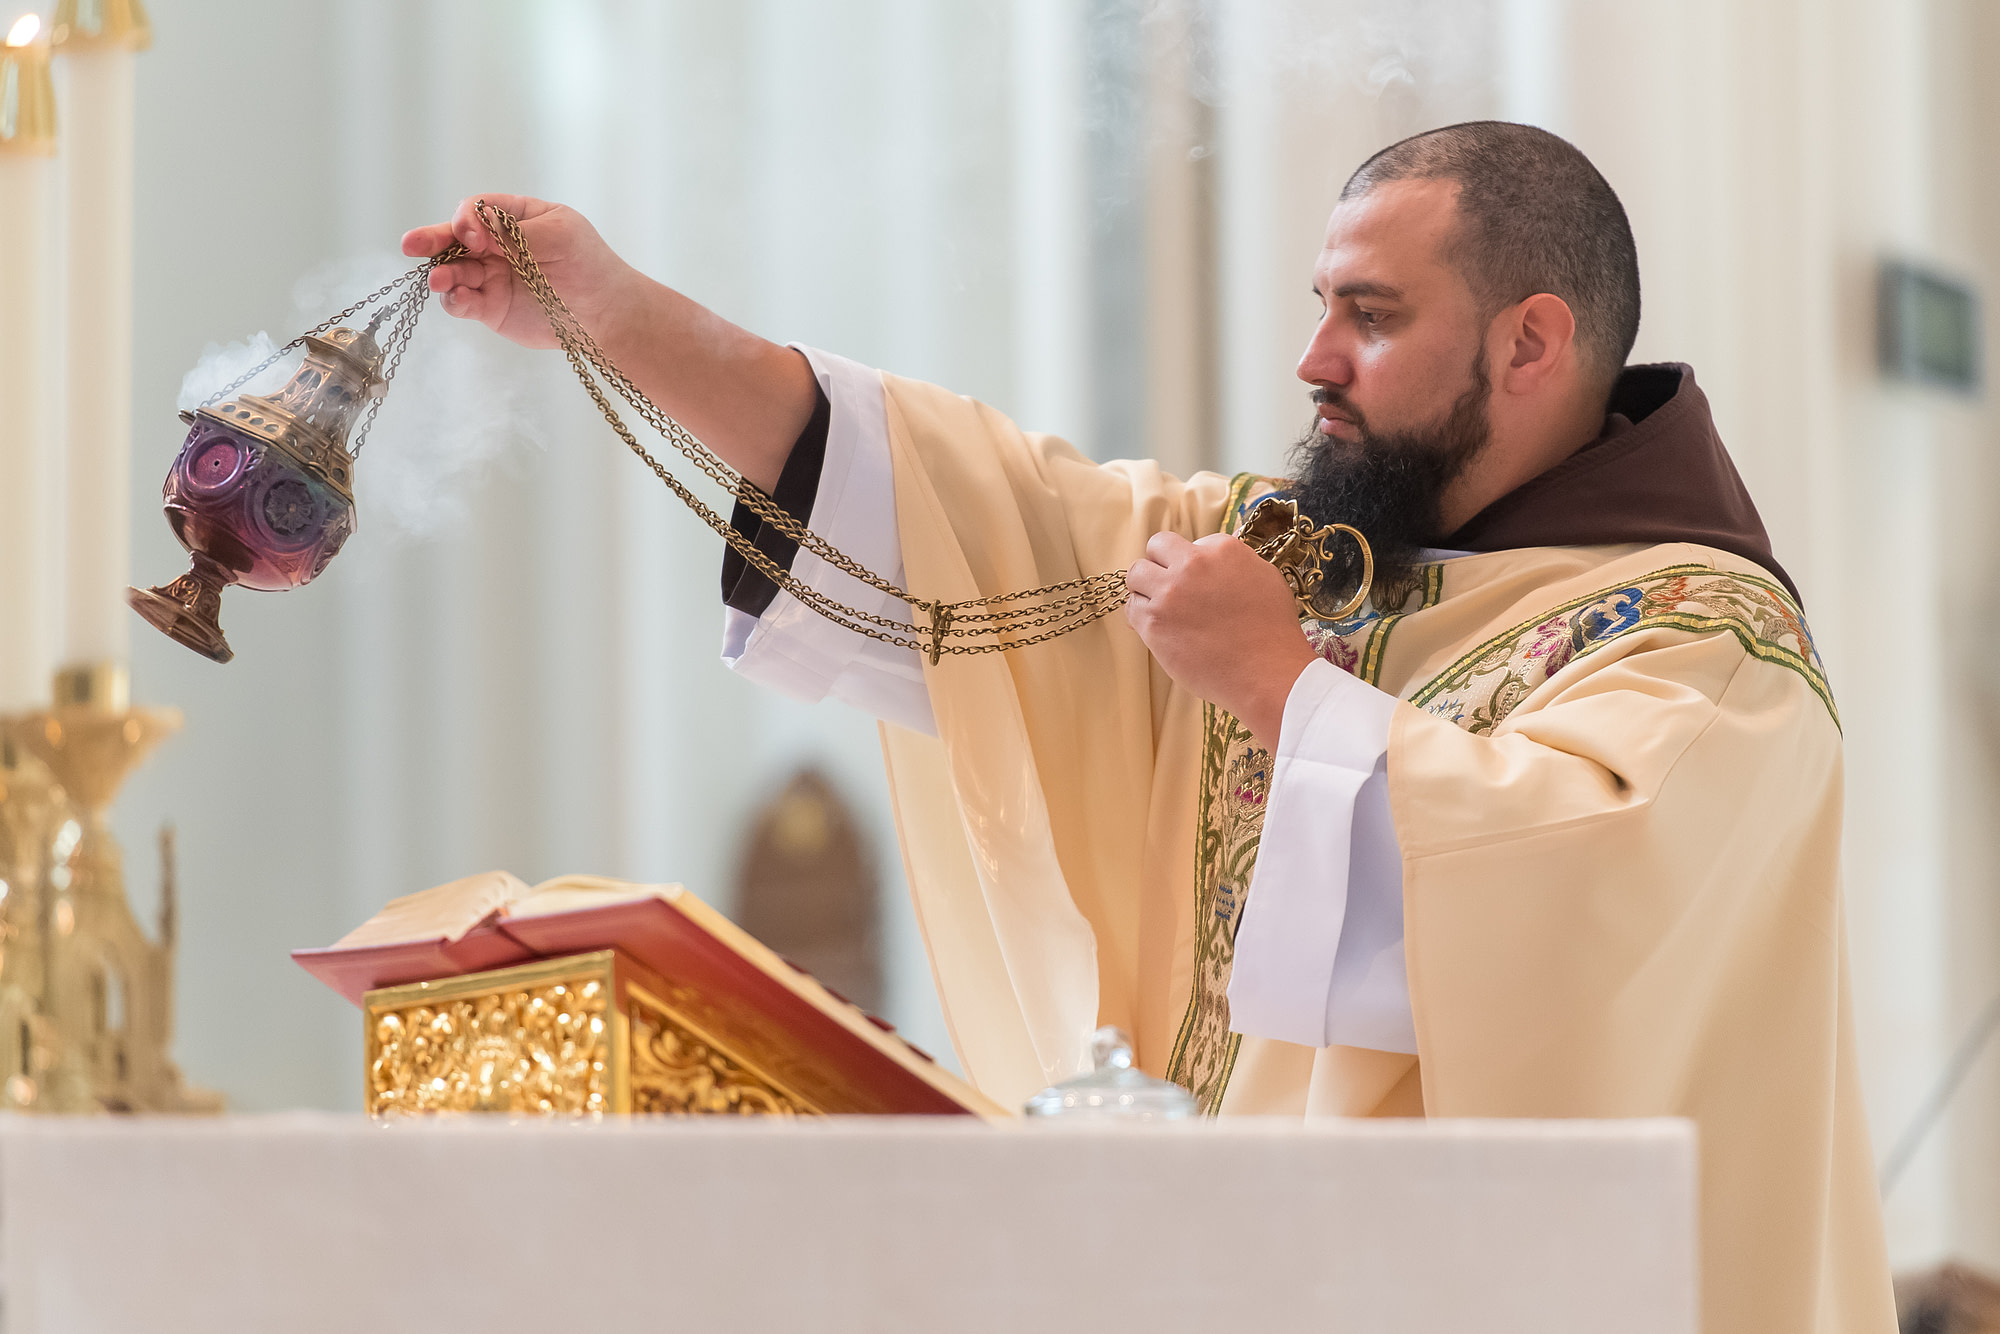 The priest offers up incense during a Cathedral Basilica of the Immaculate Conception wedding in Denver, Colorado.